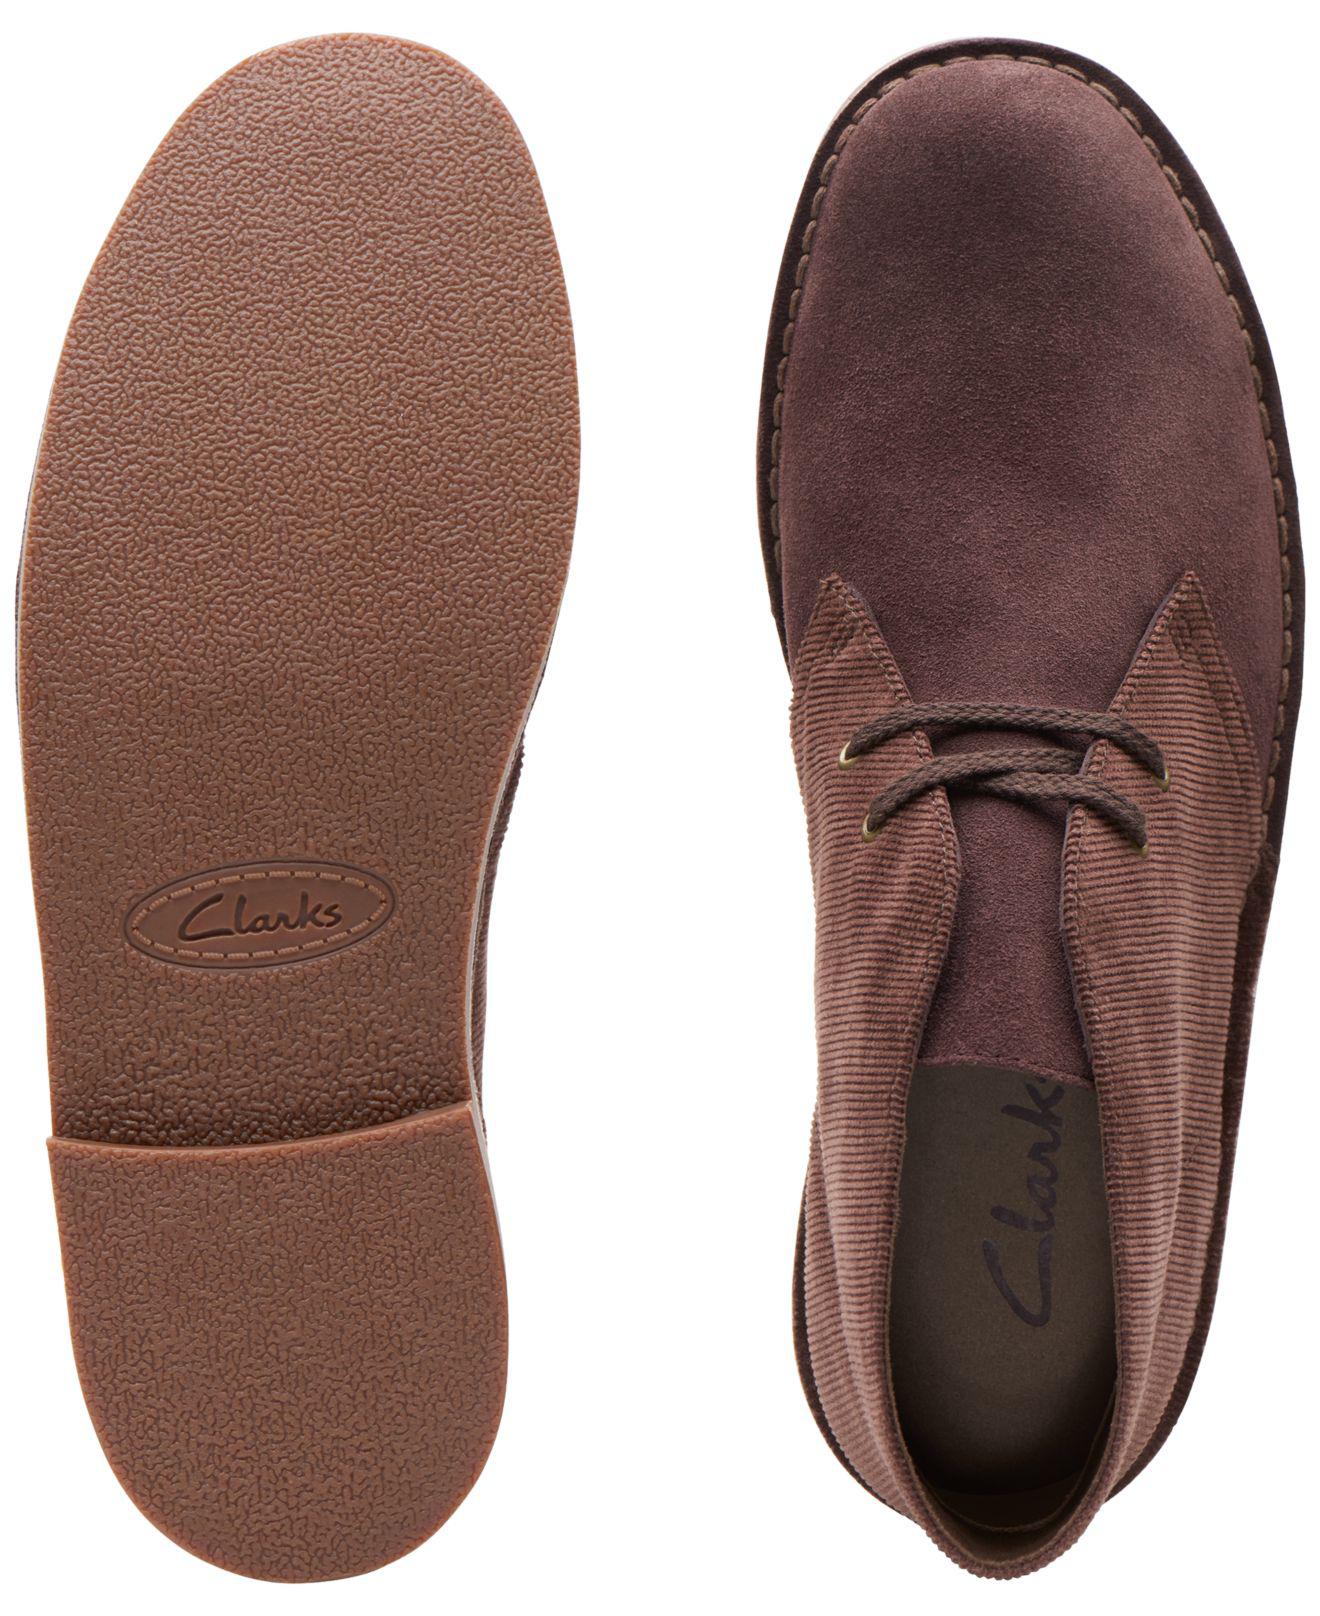 Clarks Limited Edition Corduroy 